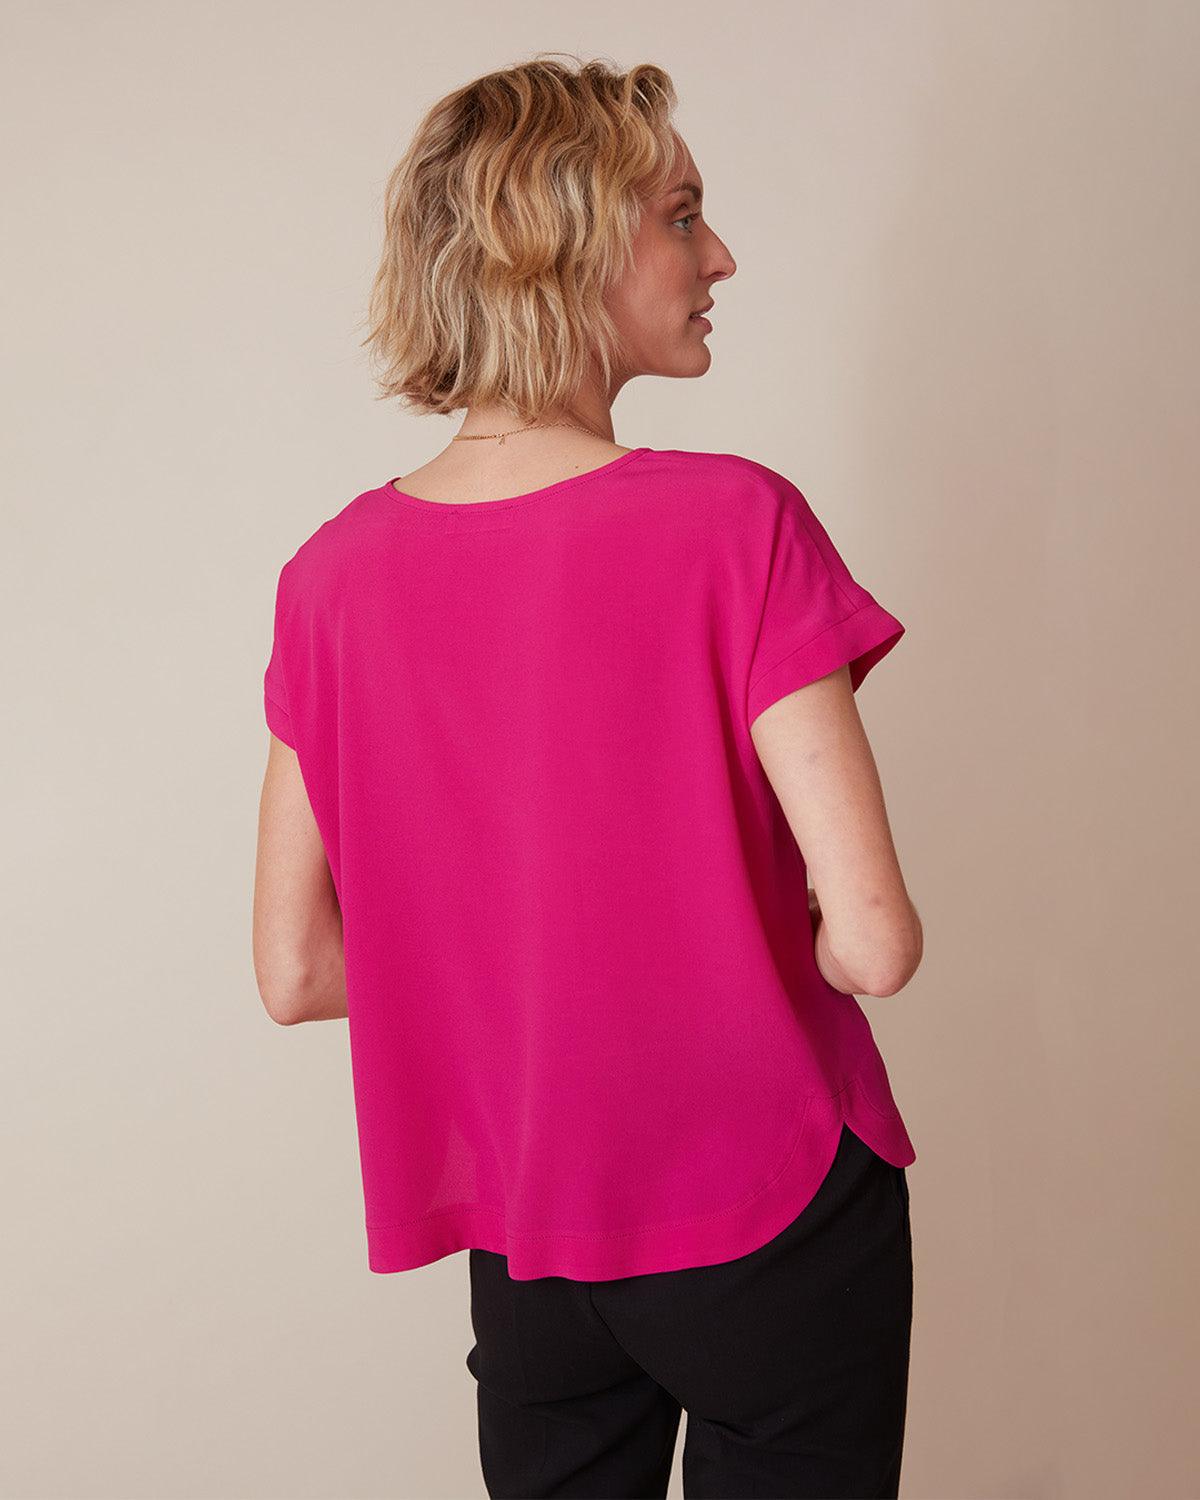 "#color_FUCHSIA|Elyse is 5'9", wearing a size XS